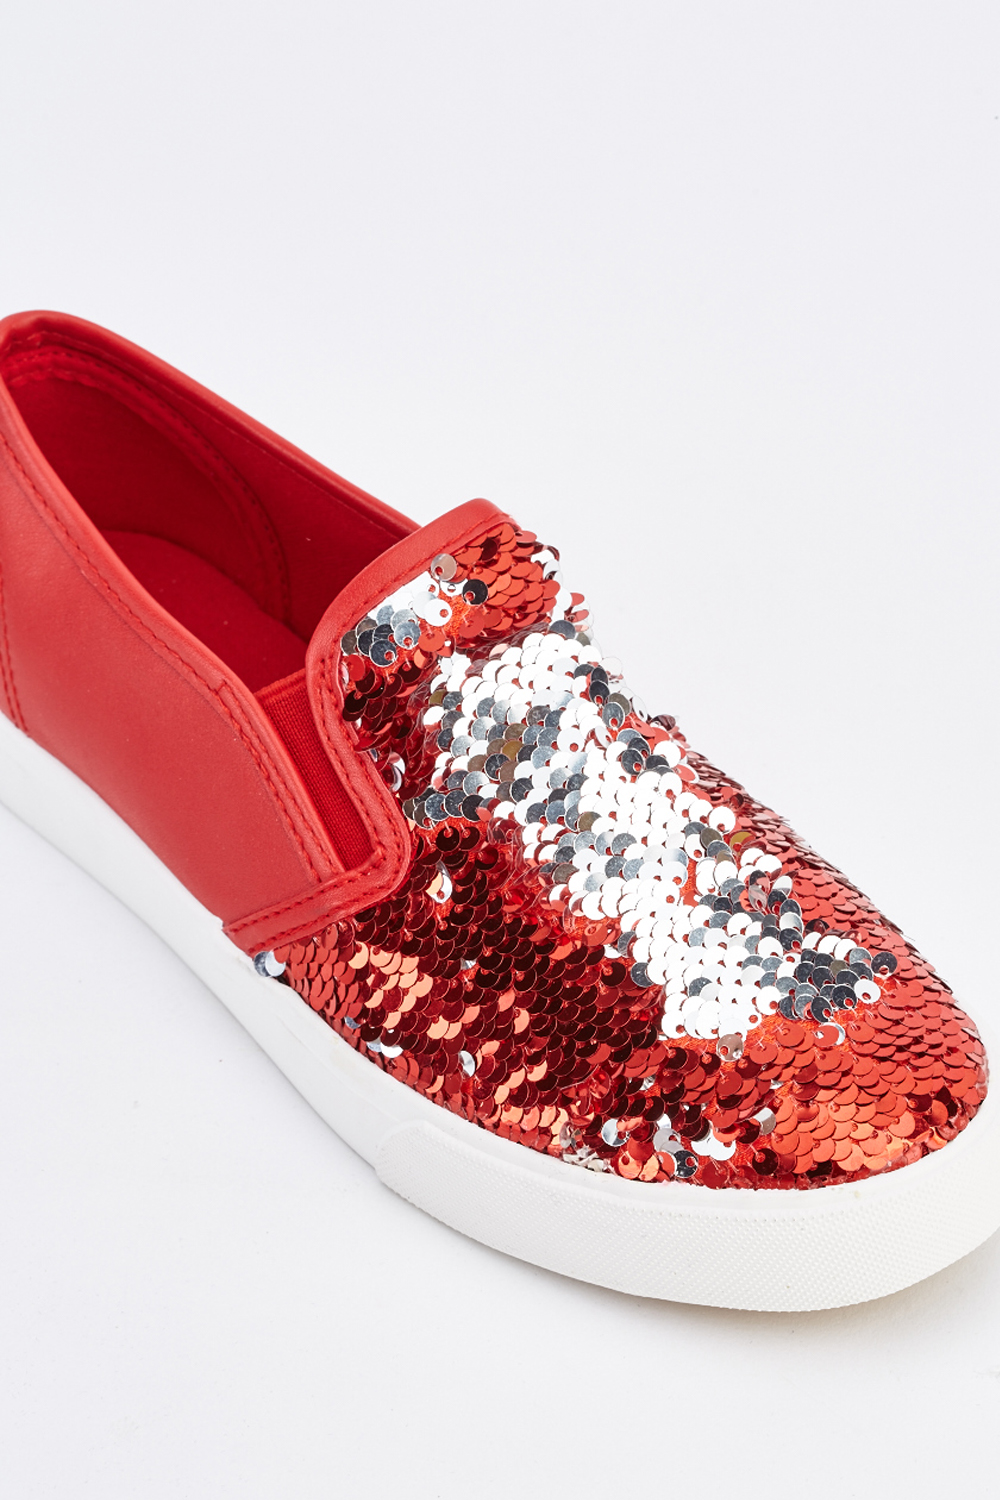 Dual Sided Sequin Plimsolls - Just $3